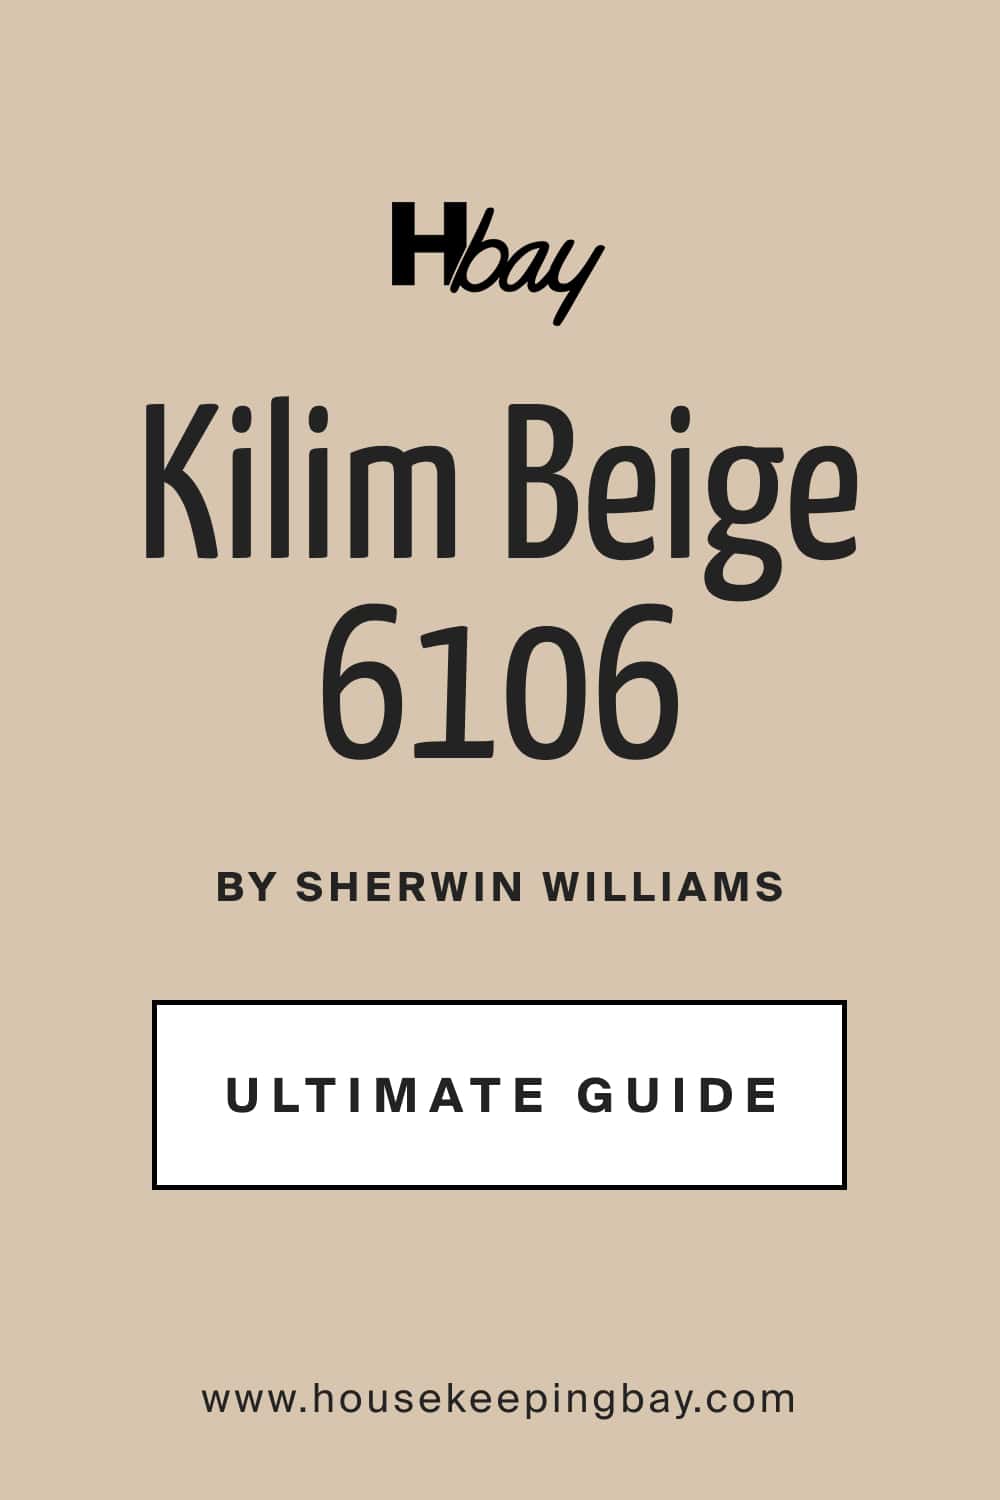 Kilim Beige SW 6106 by Sherwin Williams Ultimate Guide